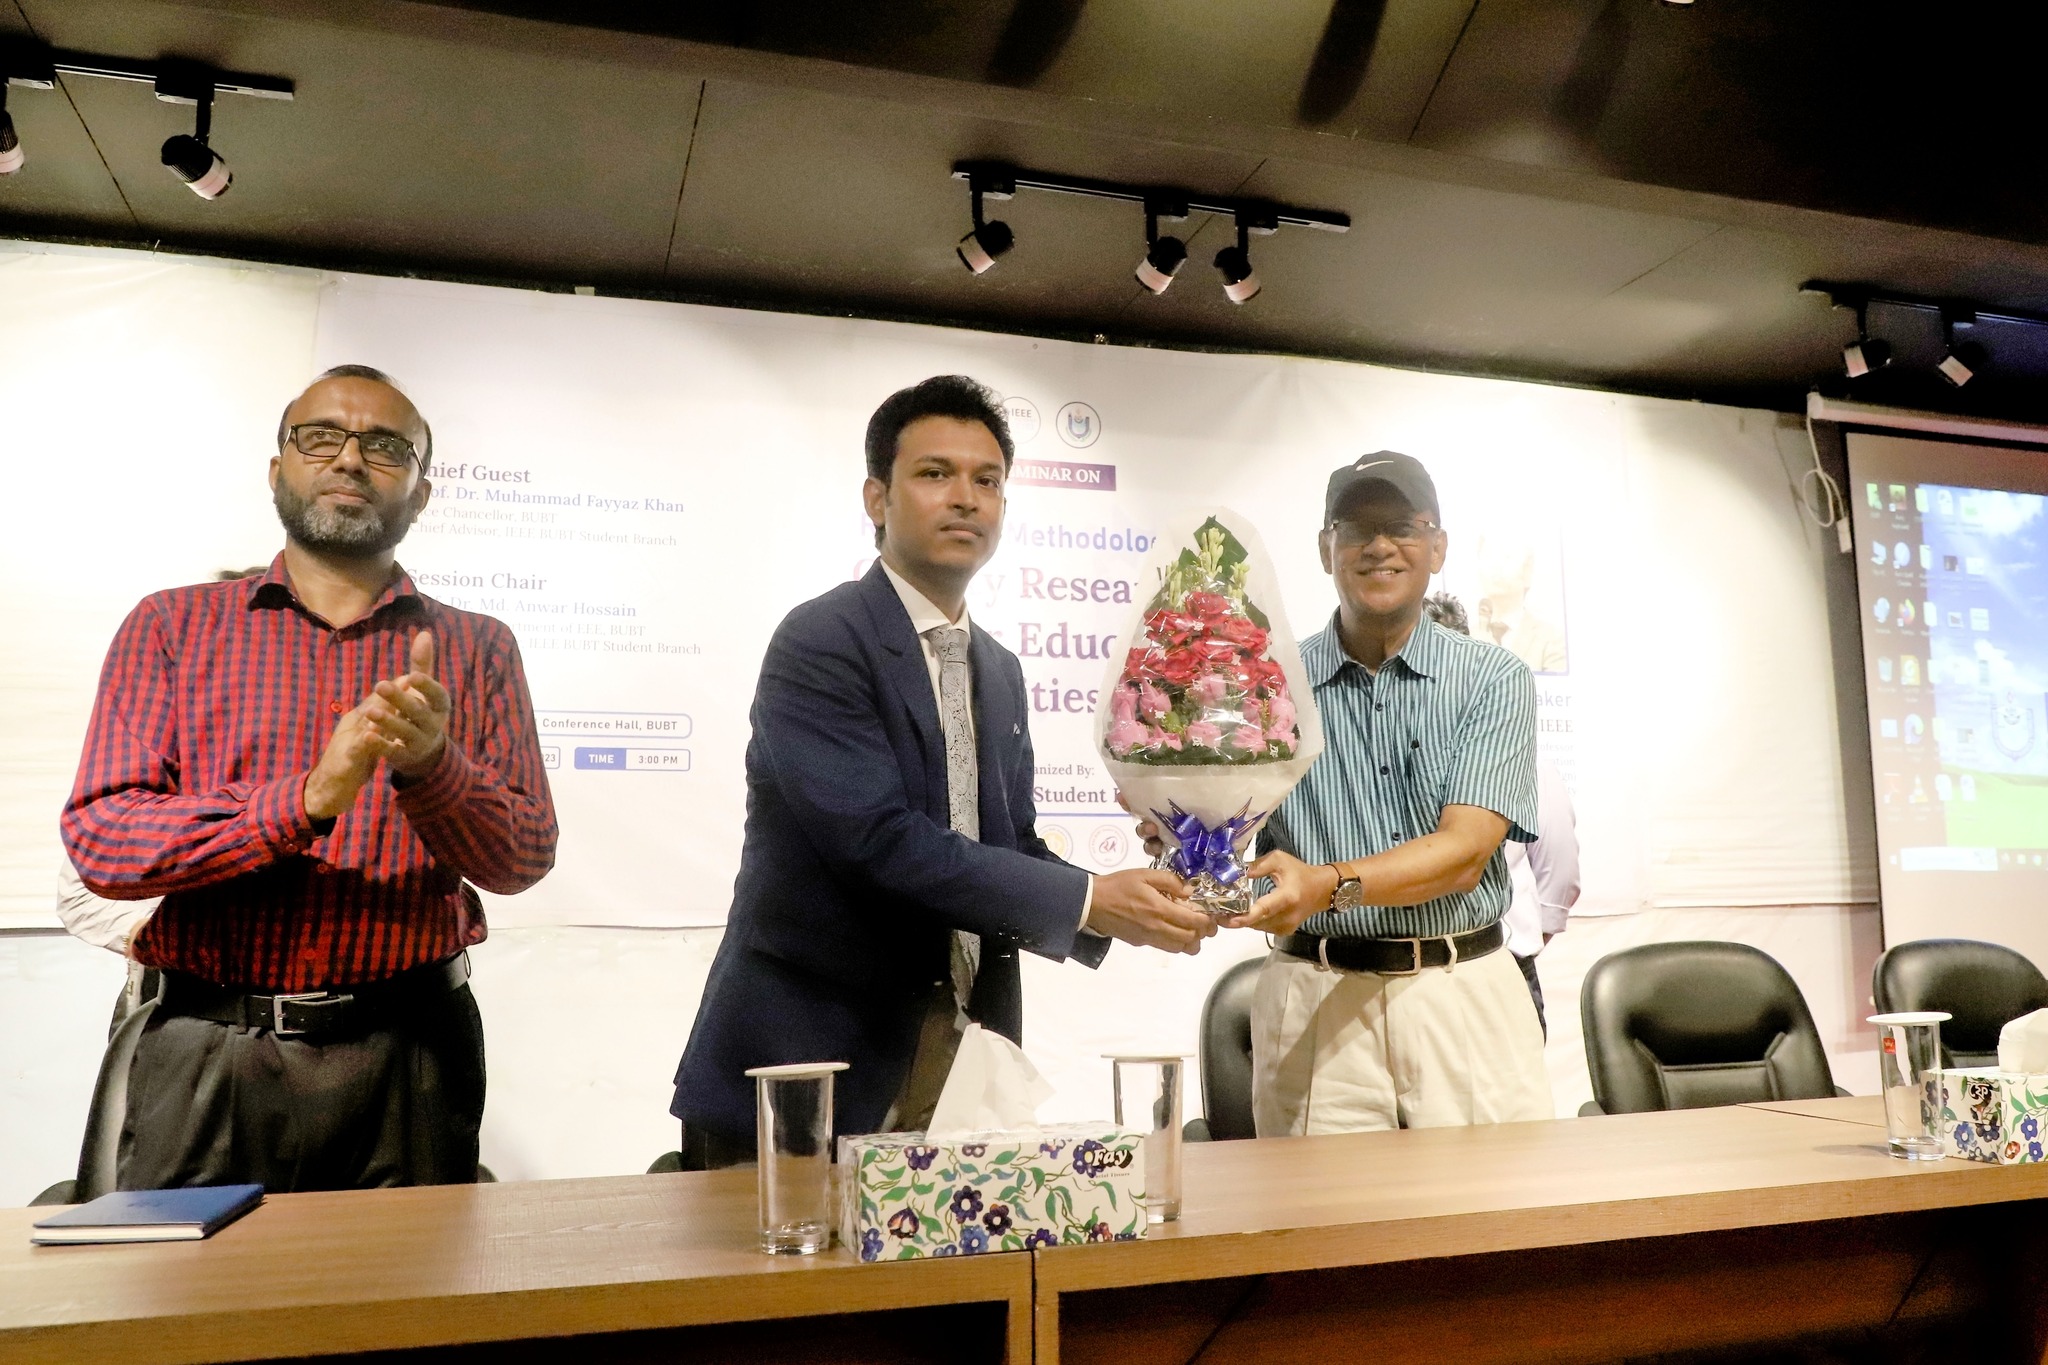 The IEEE BUBT Student Branch organized a seminar on “𝐑𝐞𝐬𝐞𝐚𝐫𝐜𝐡 𝐌𝐞𝐭𝐡𝐨𝐝𝐨𝐥𝐨𝐠𝐲 𝐟𝐨𝐫 𝐐𝐮𝐚𝐥𝐢𝐭𝐲 𝐑𝐞𝐬𝐞𝐚𝐫𝐜𝐡 𝐚𝐧𝐝 𝐇𝐢𝐠𝐡𝐞𝐫 𝐄𝐝𝐮𝐜𝐚𝐭𝐢𝐨𝐧 𝐎𝐩𝐩𝐨𝐫𝐭𝐮𝐧𝐢𝐭𝐢𝐞𝐬 𝐢𝐧 𝐉𝐚𝐩𝐚𝐧.”